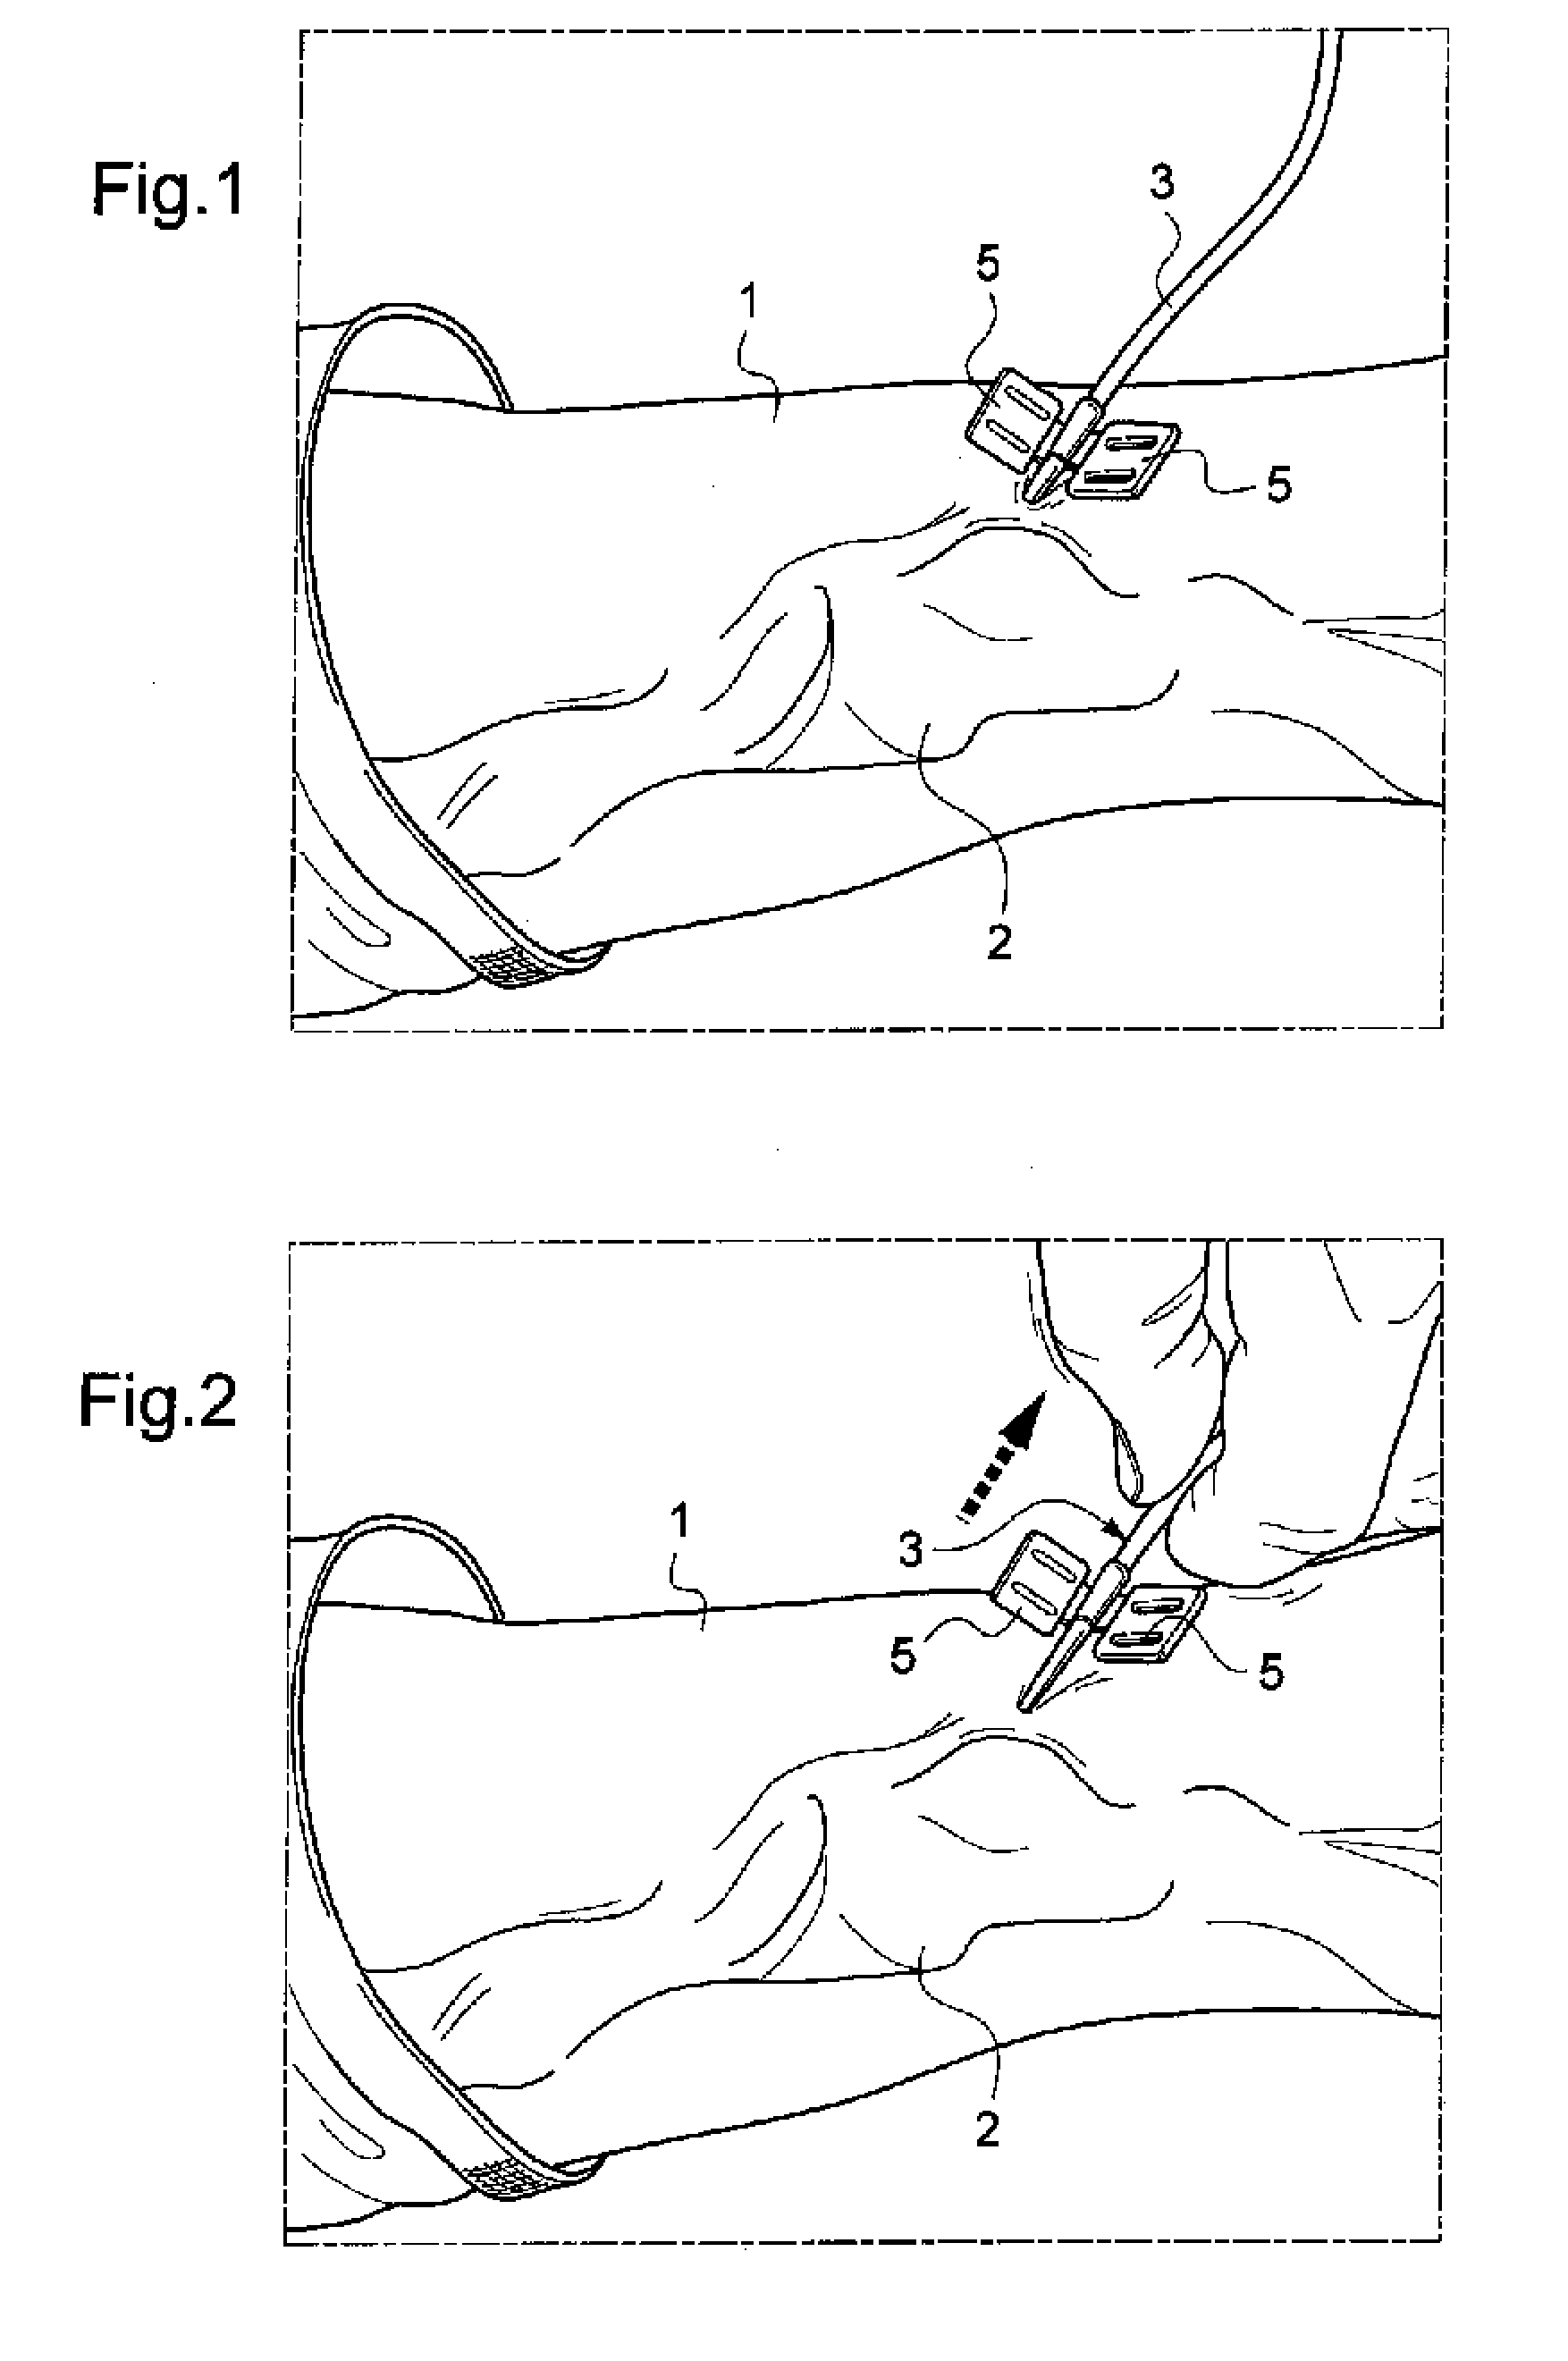 Medical device for a puncture site or infusion site